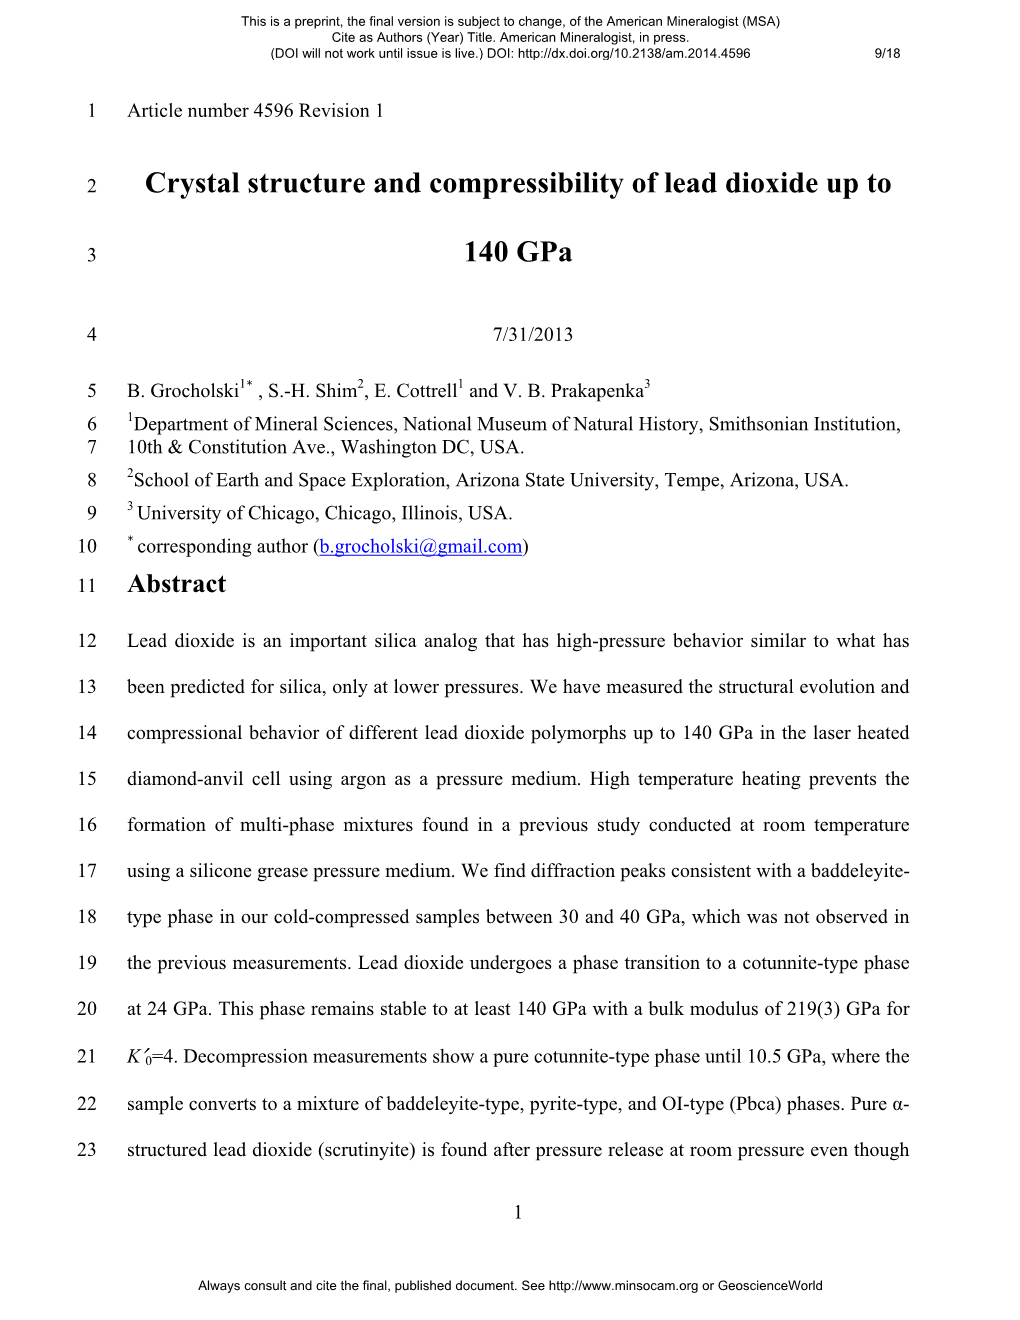 Crystal Structure and Compressibility of Lead Dioxide up to 140